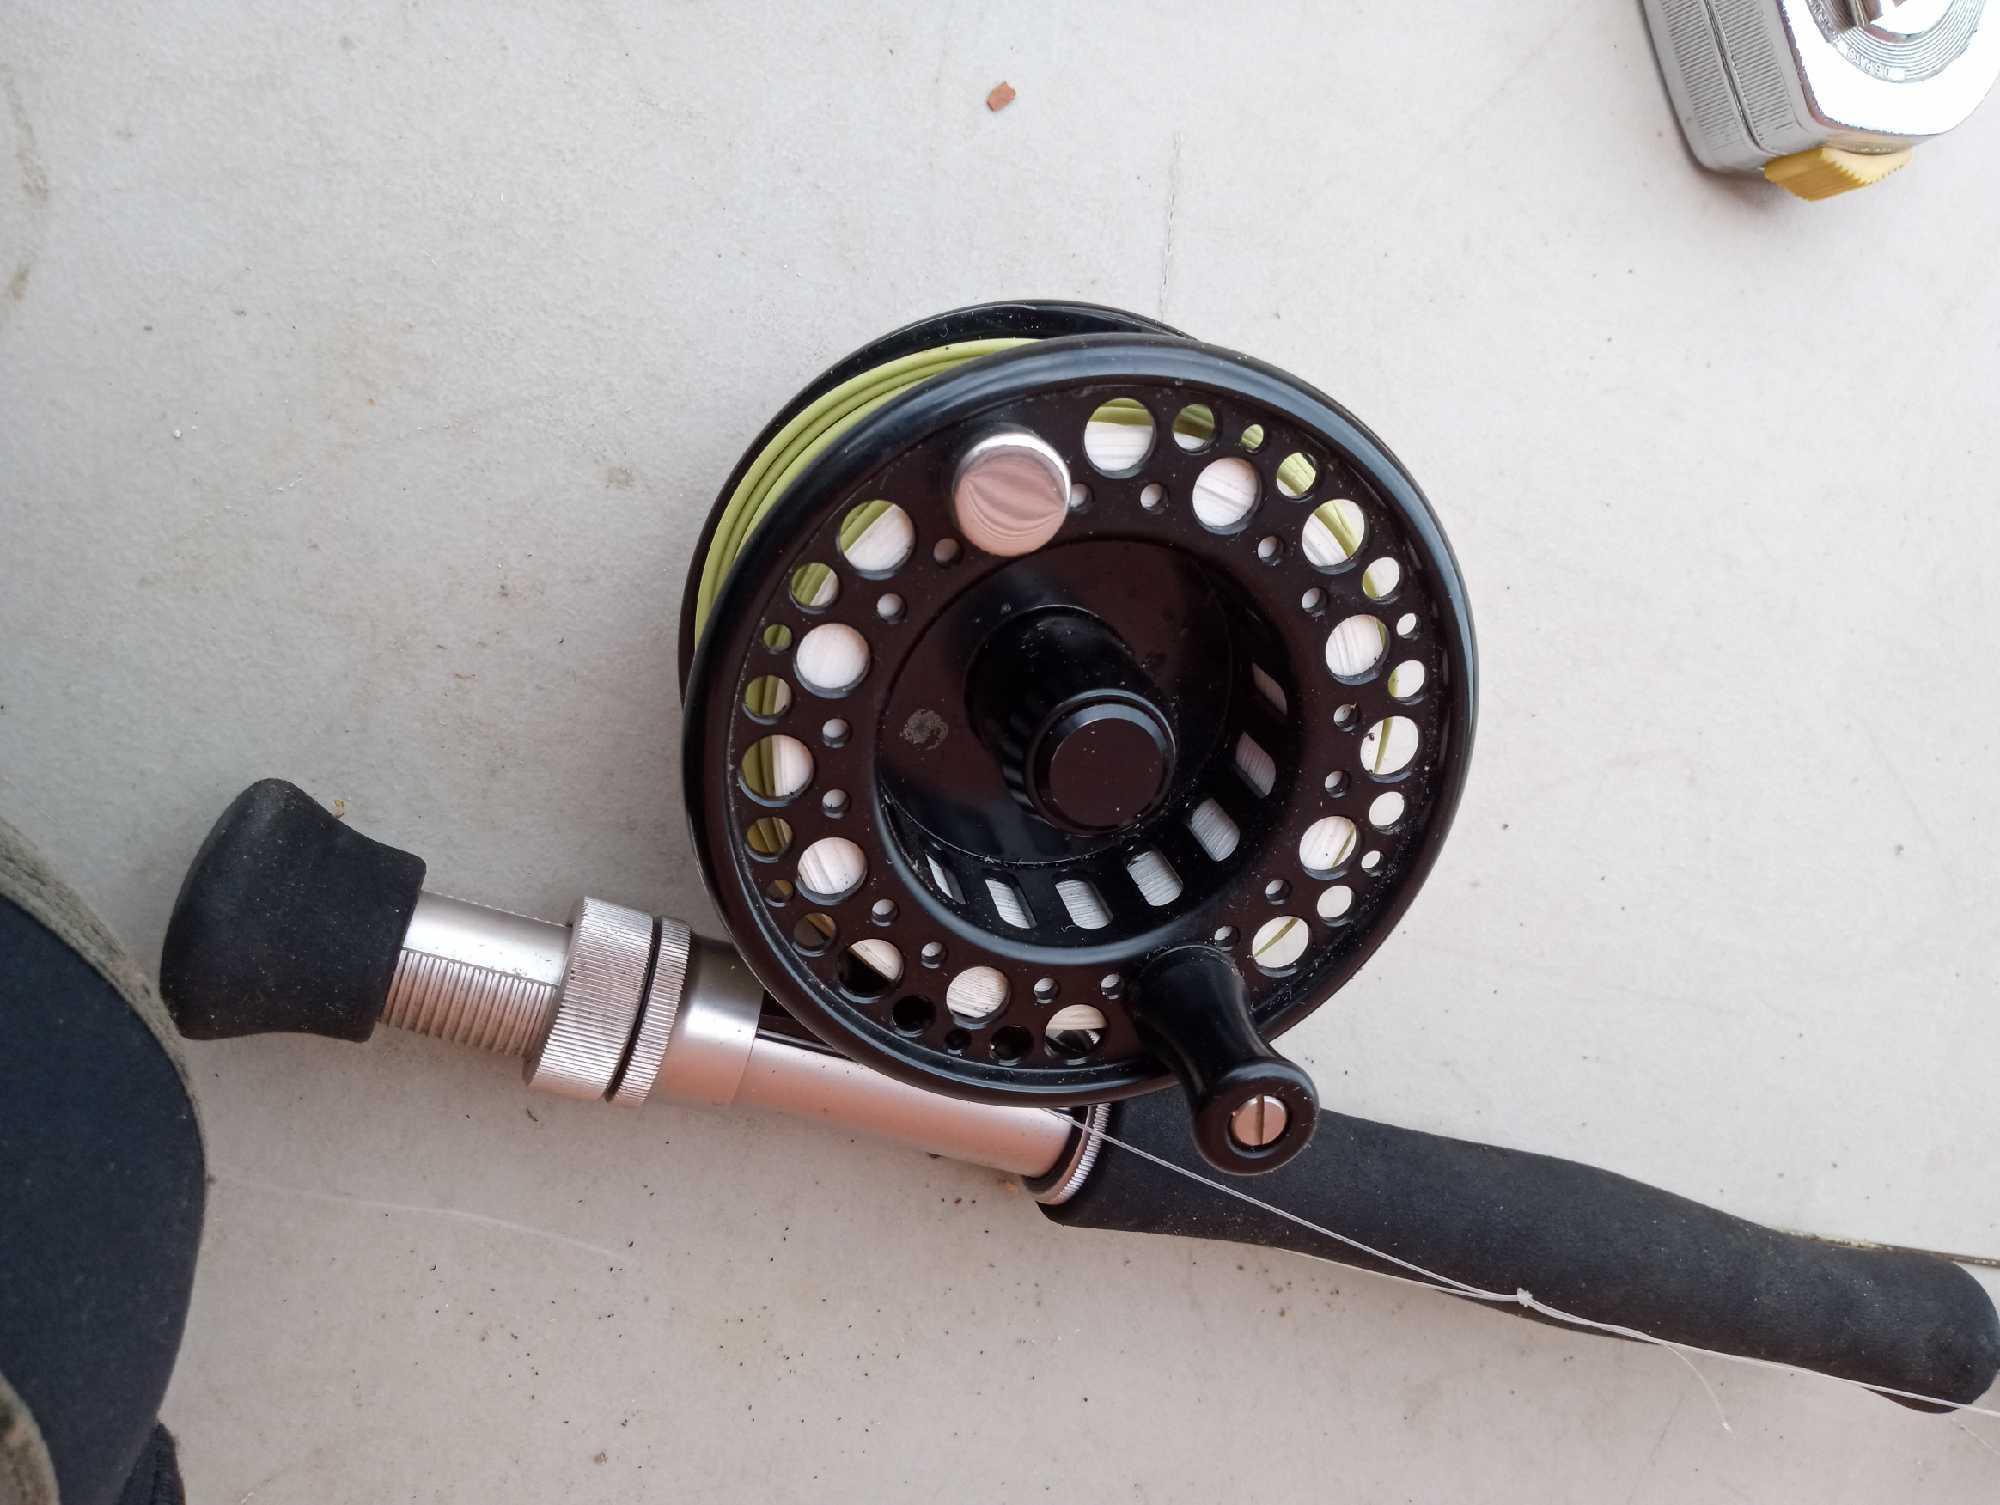 FLY FISHING ROD AND REEL, SALT WATER, PERHAPS? With carry cases